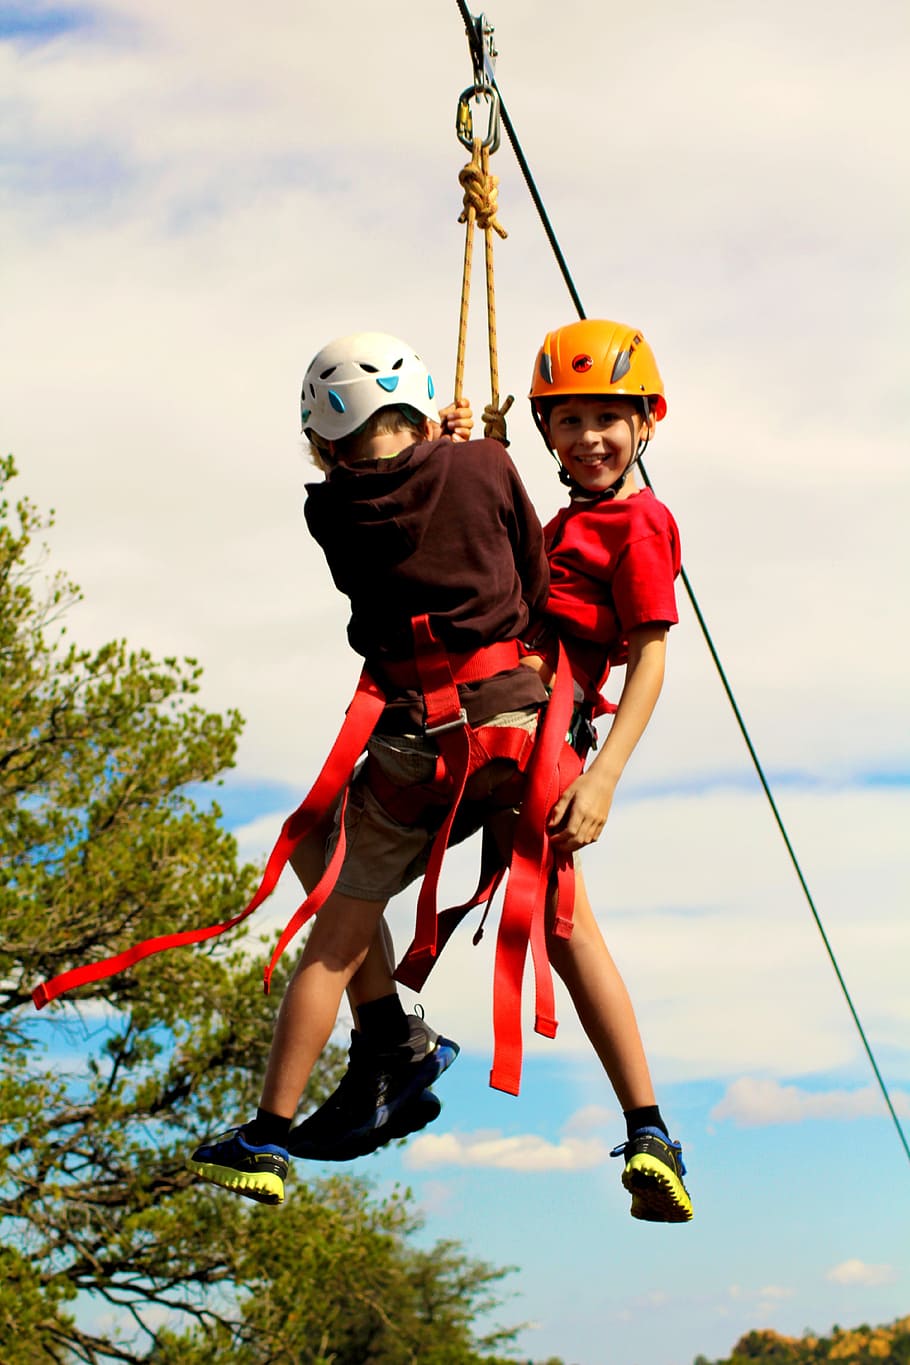 two, boys, hanging, cable, zip line, children, kids, climbing, child, kid